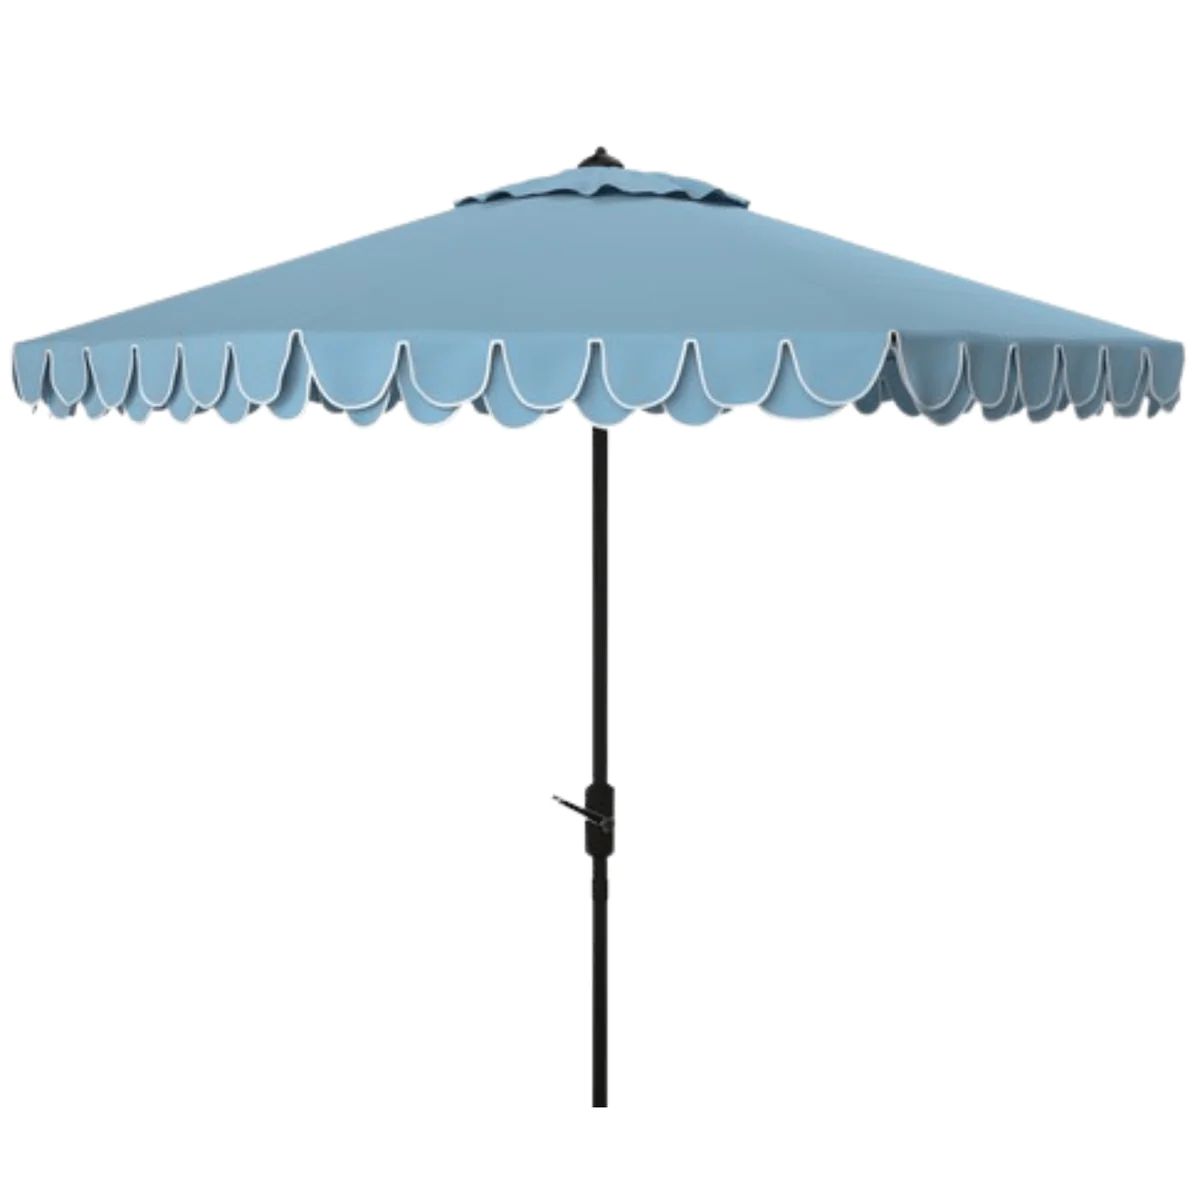 Sky Blue Scalloped Edge Auto Tilt 9' Outdoor Patio Umbrella | The Well Appointed House, LLC